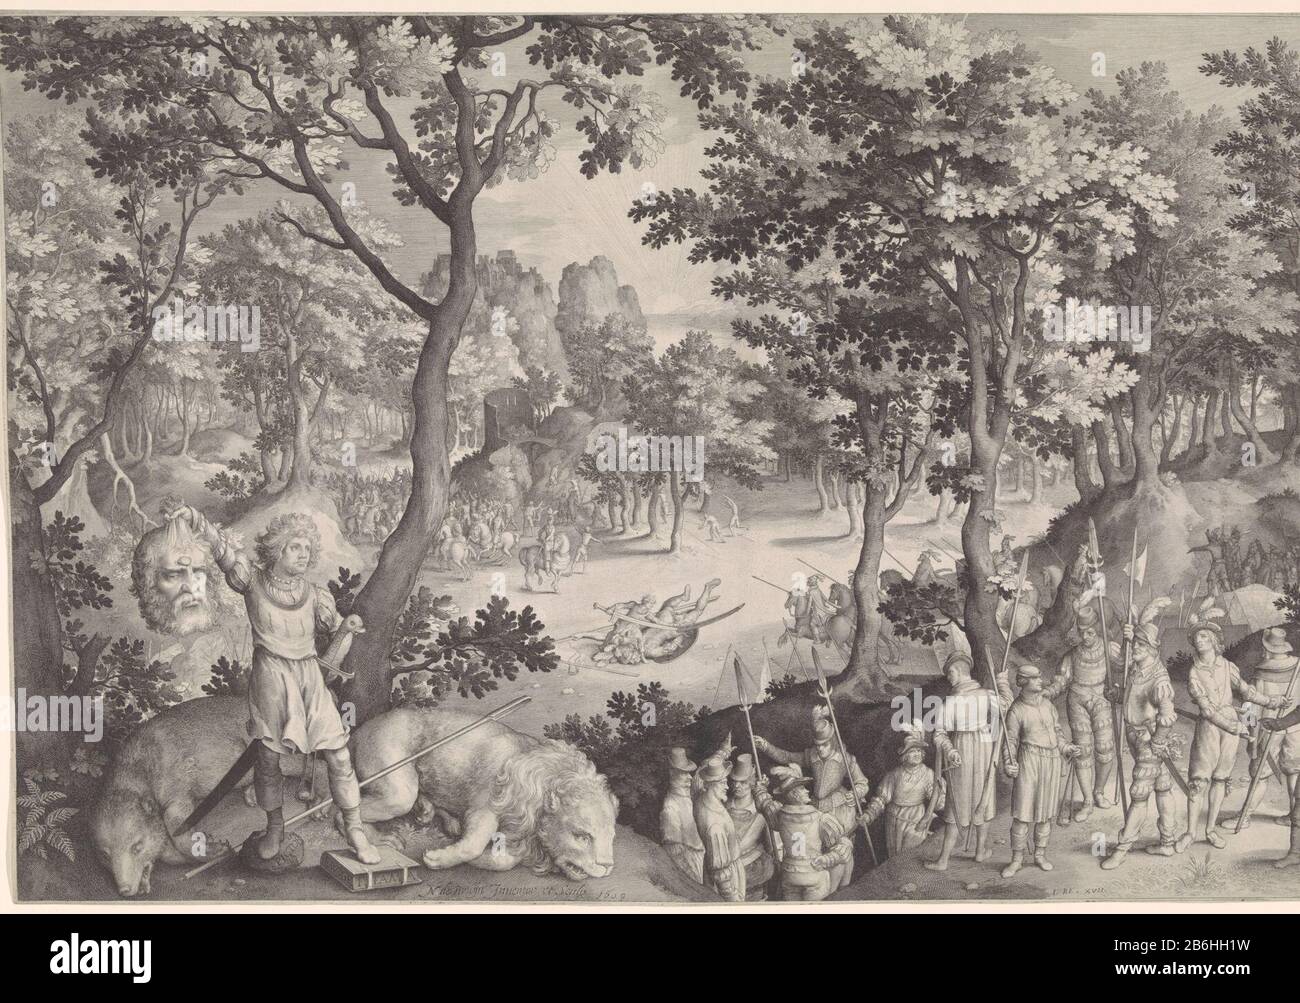 David Goliath RP-P-1896-A-19137 In the middle the battle between the Philistines and Israel. David is about to behead about Goliath. In the foreground David with the Head of Goliath. Behind him, a dead bear and a dead leeuw. Manufacturer : printmaker: Nicolaes de Bruyn (listed property) to design: Nicolaes de Bruyn (listed property) Place manufacture: Antwerp Date: 1609 Physical features: engra; proofing material: paper Technique: engra (printing process) Measurements: sheet: b 695 mm × H 449 mm Subject: David with Goliath's headthe armies of the Israelites and the Philistines position facing Stock Photo